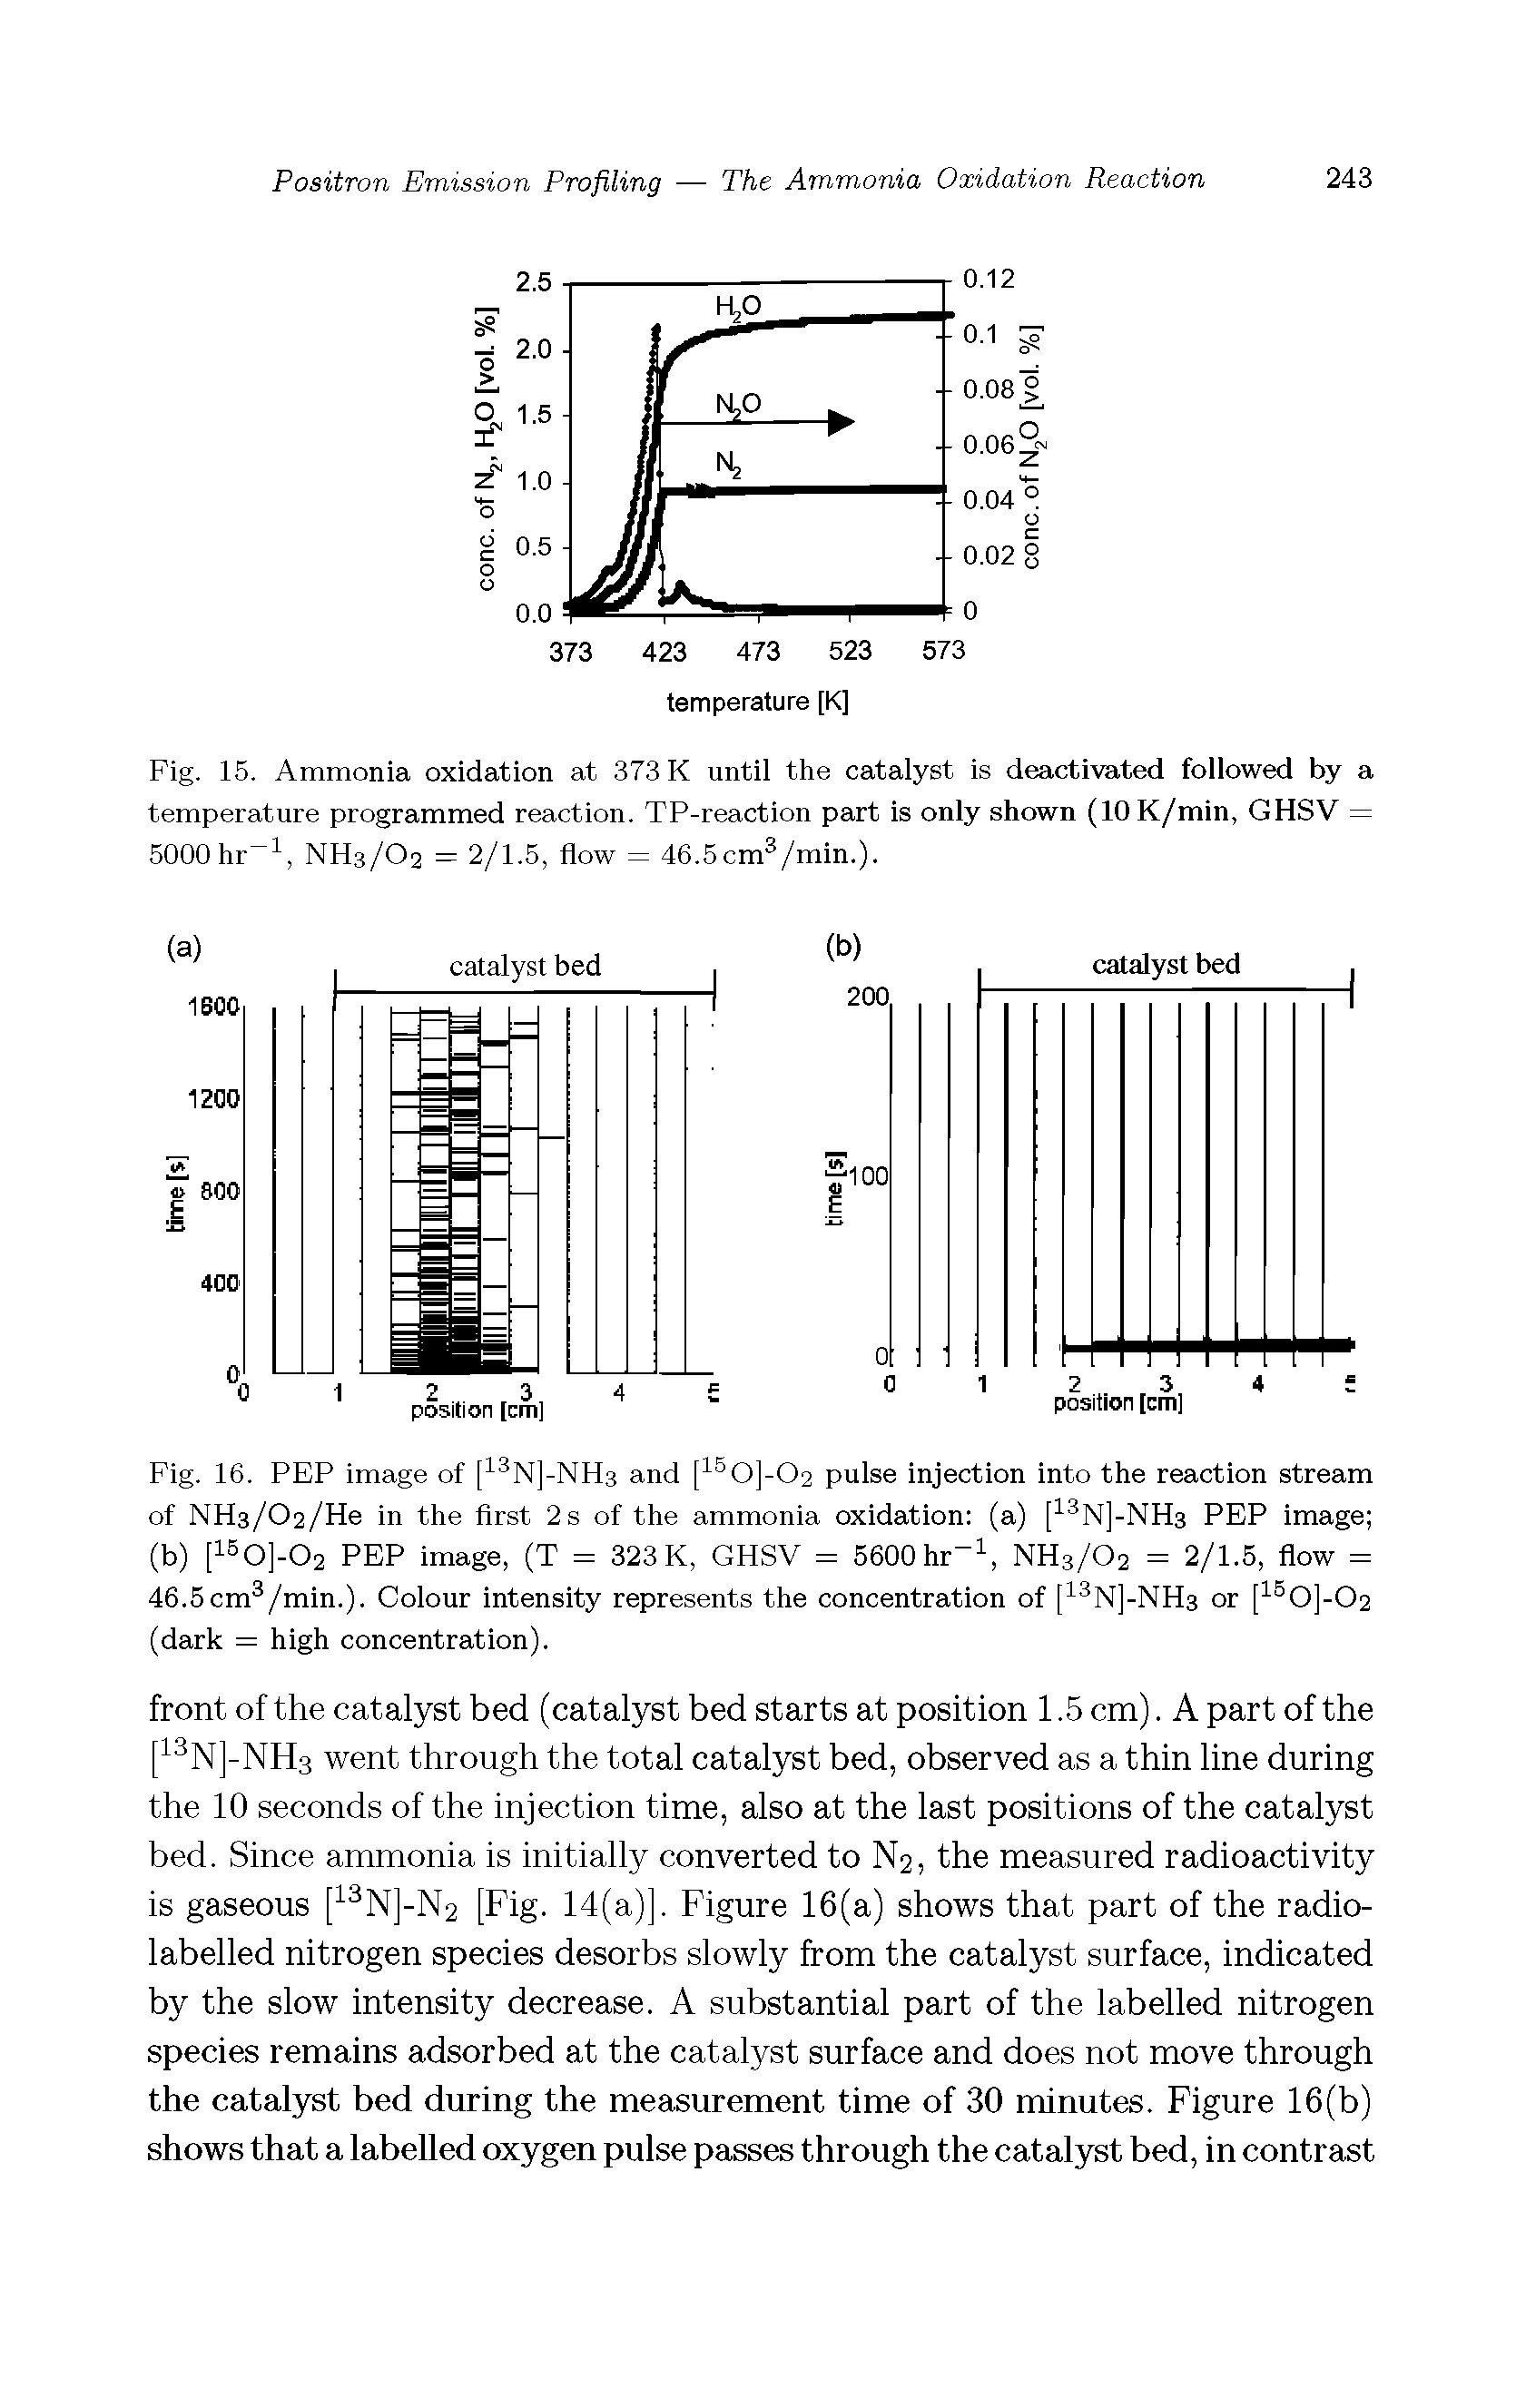 Fig. 15. Ammonia oxidation at 373 K until the catalyst is deactivated followed by a temperature programmed reaction. TP-reaction part is only shown (lOK/min, GHSV = 5000hr i, NH3/O2 = 2/1.5, flow = 46.5cm /min.).